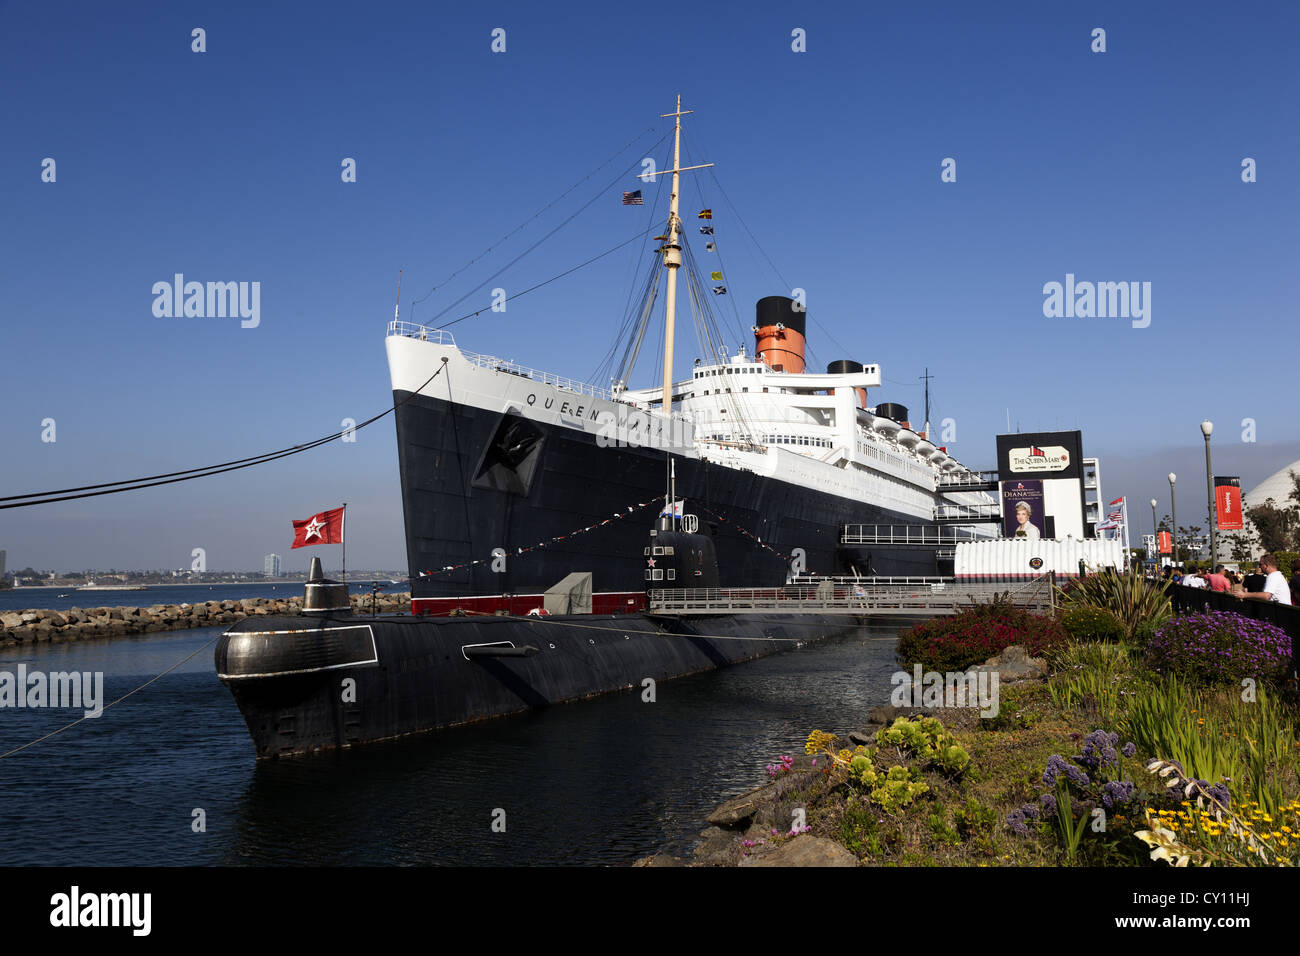 Queen Mary old ocean liner, ship, cruis shp docked at Long Beach Southern California United States Stock Photo